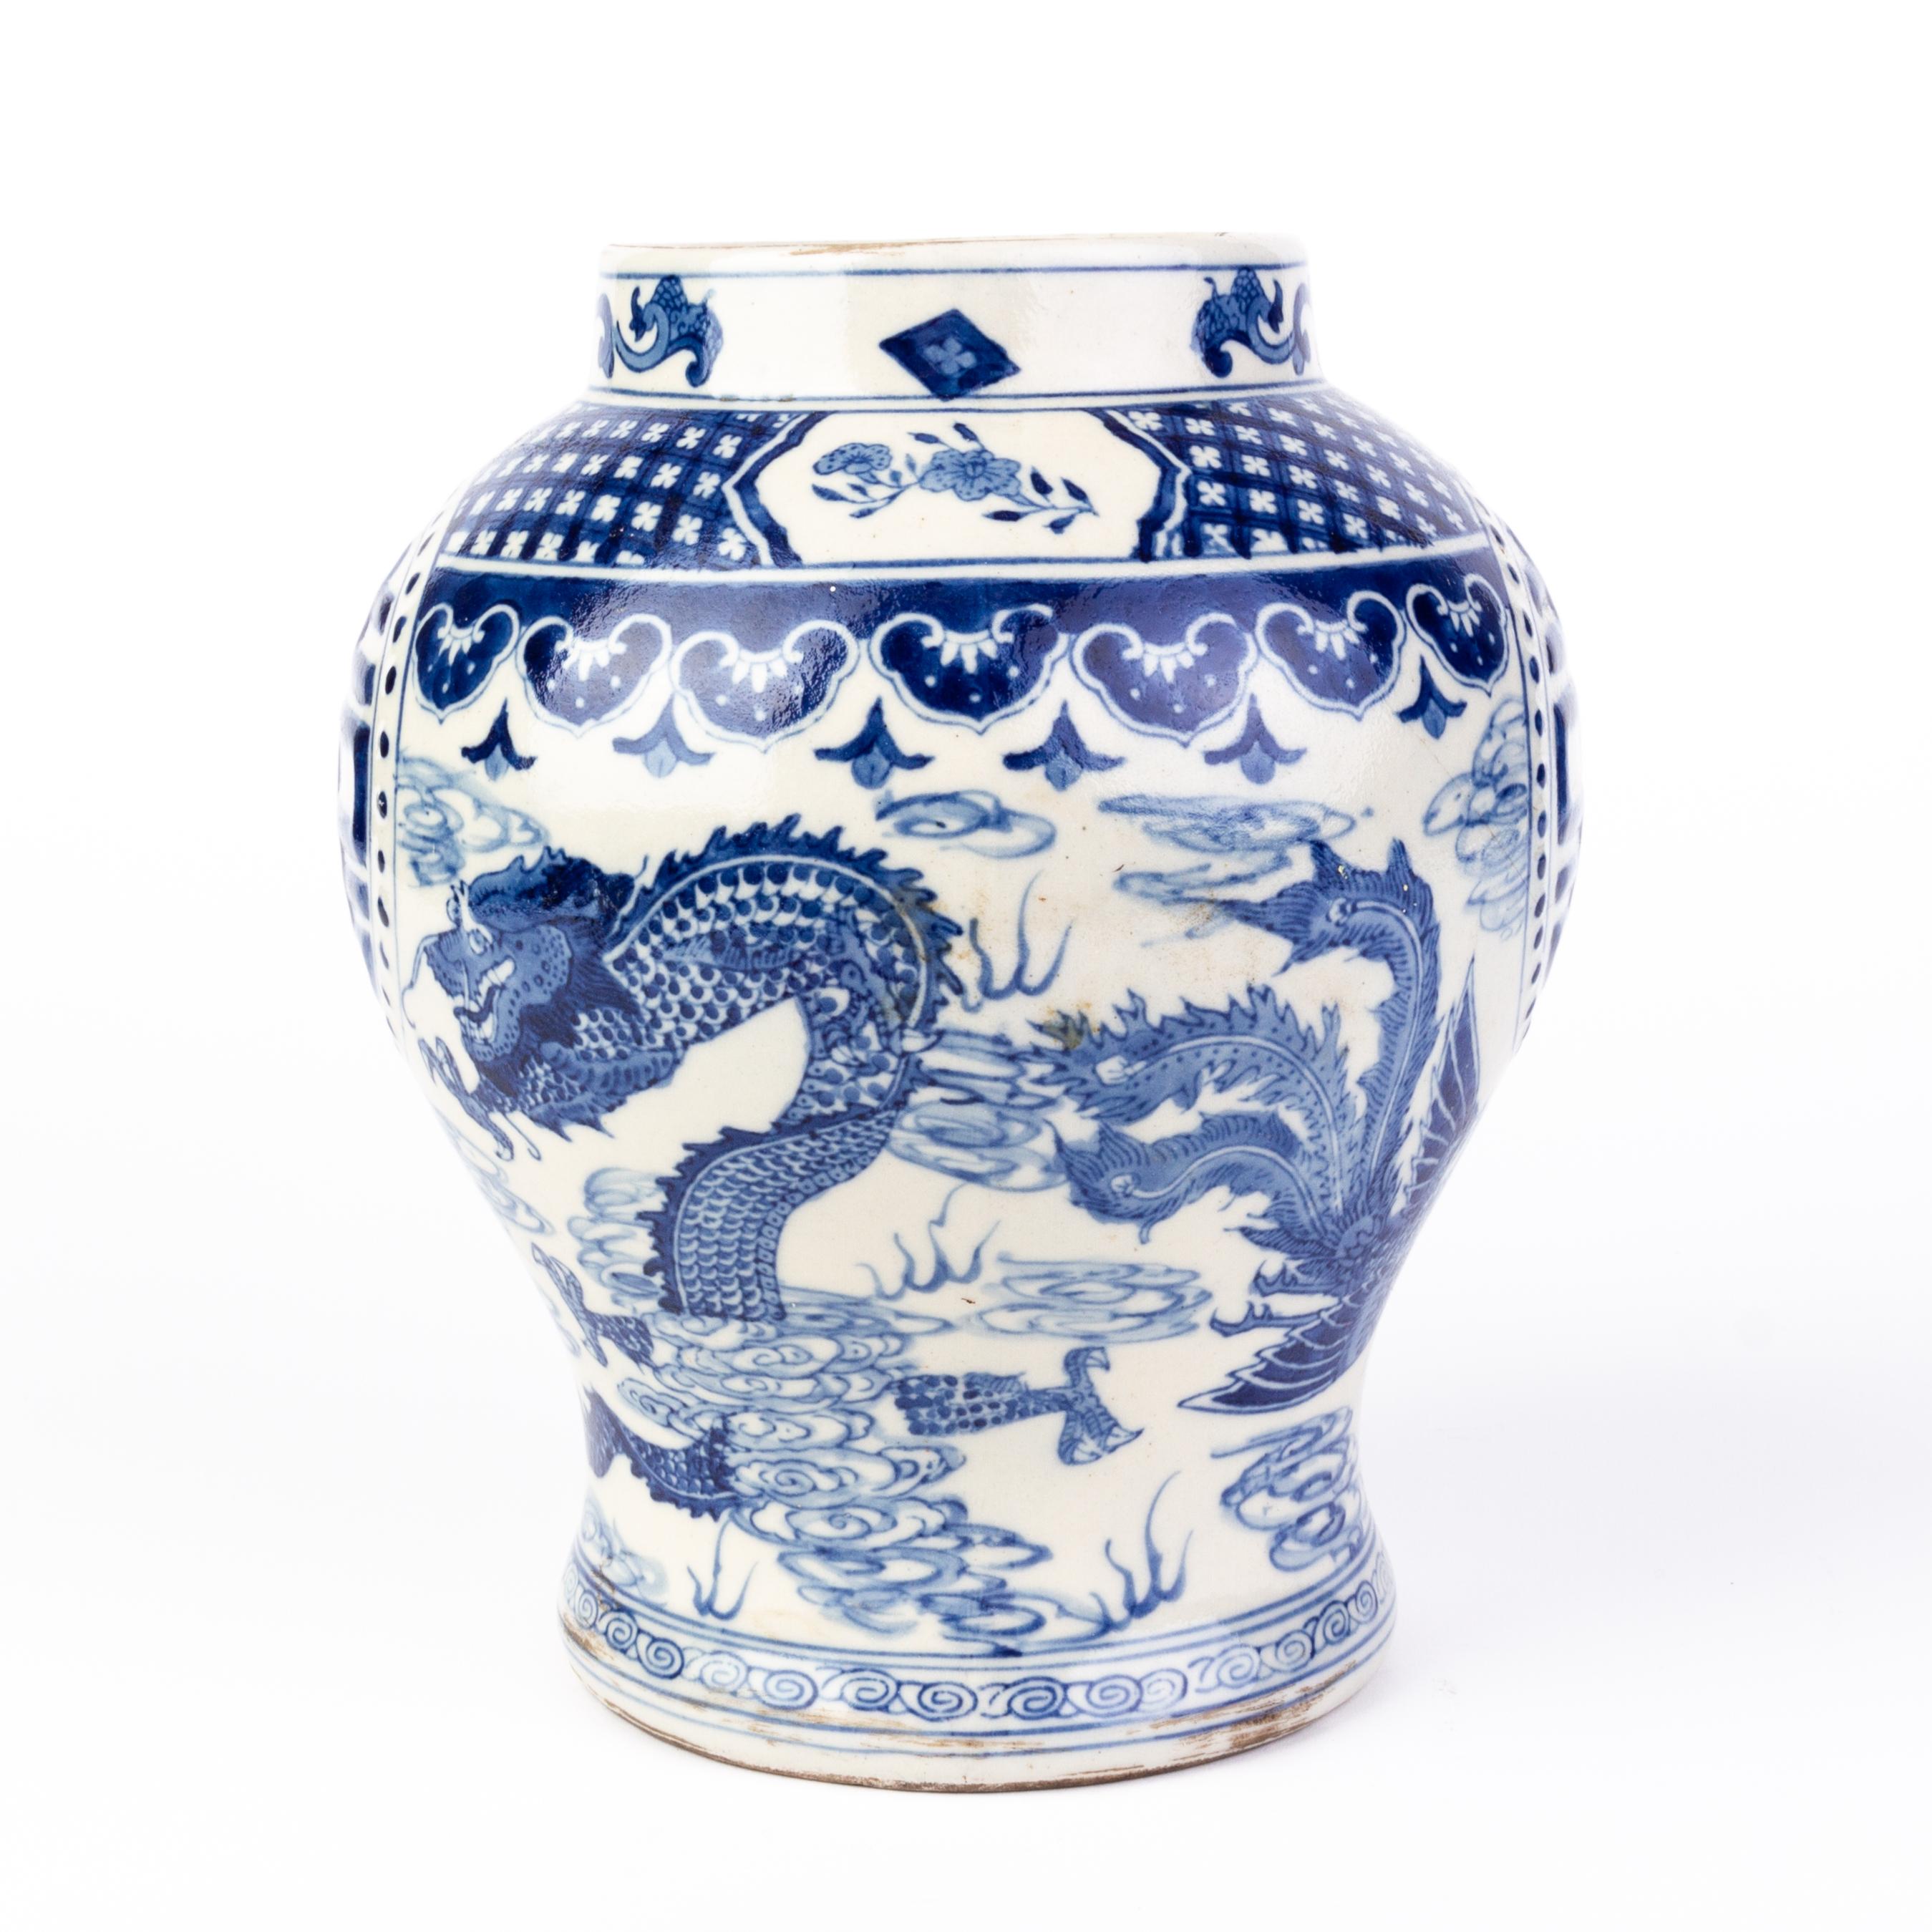 Late 19th century Chinese blue & white ginger jar, decorated with swirling dragon.
From a private collection.
Free international shipping.